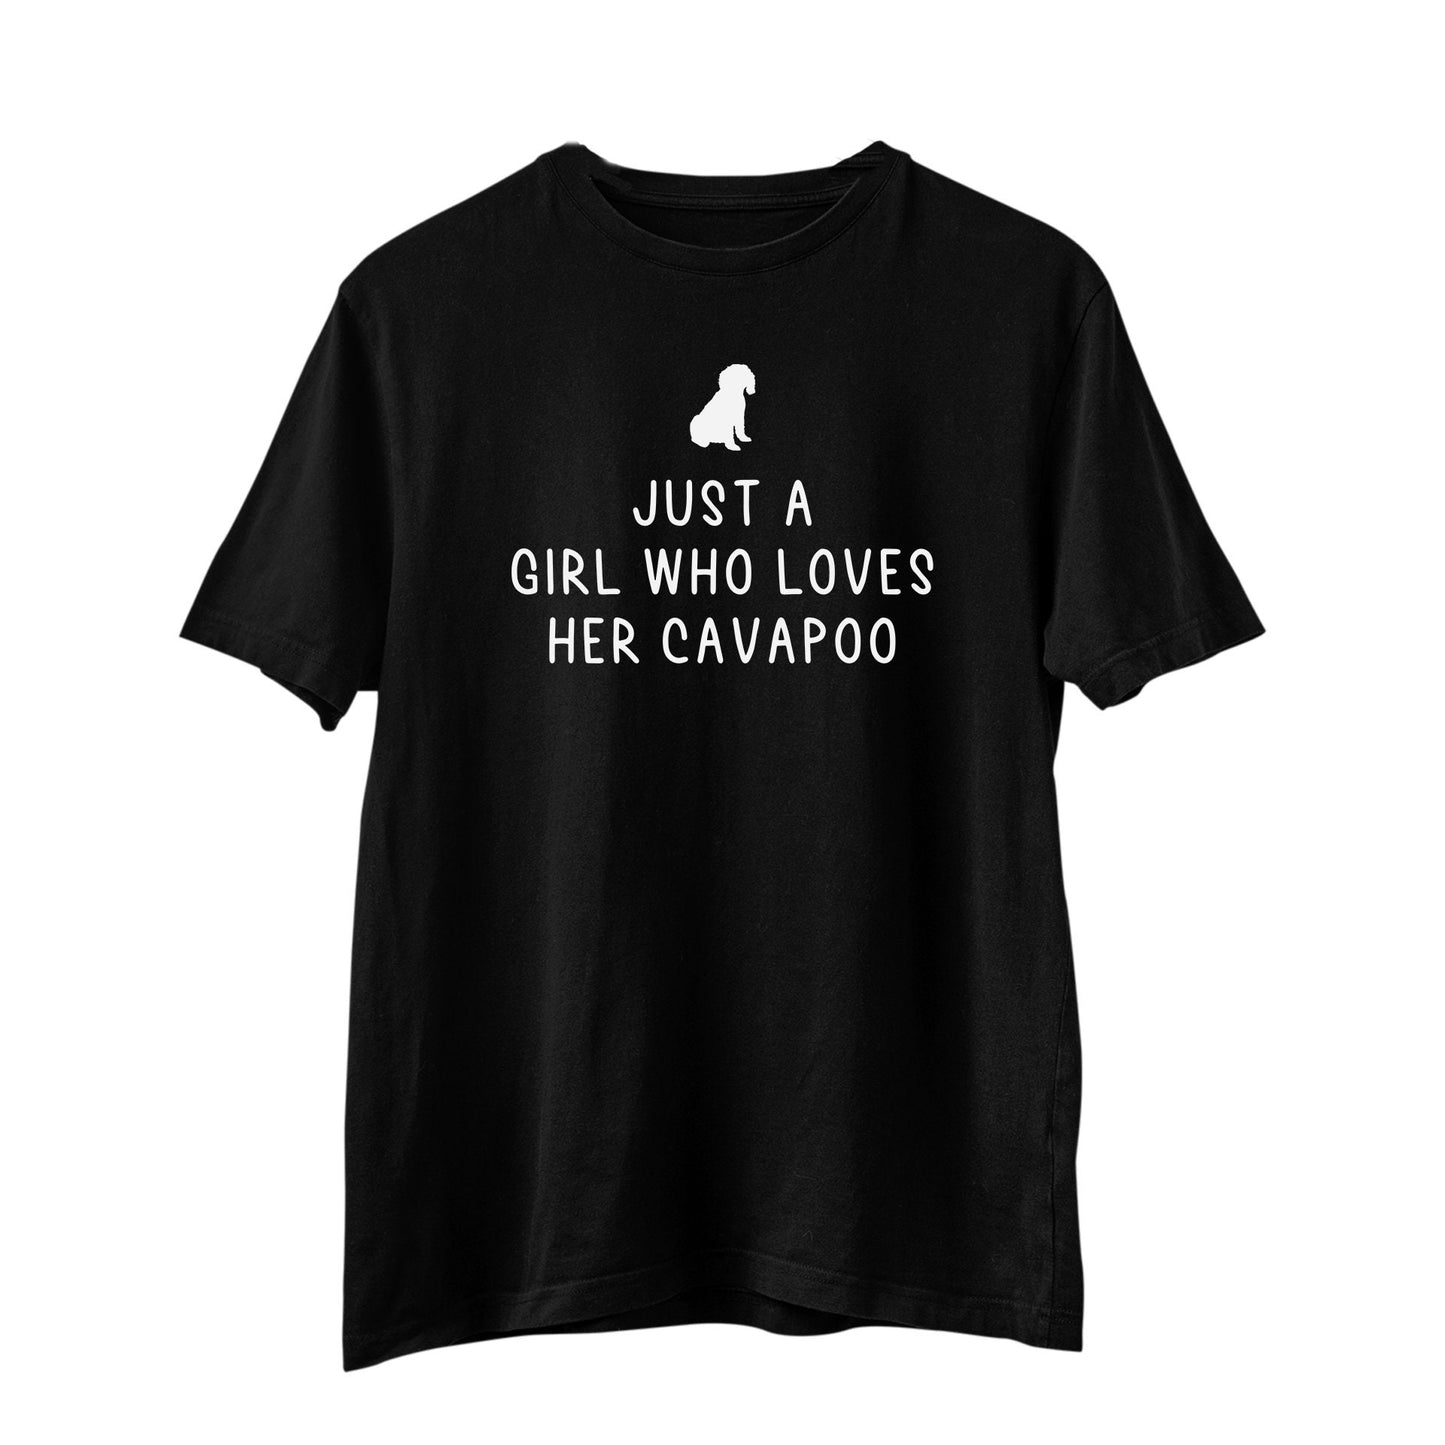 Just a Girl Who Loves Her Cavapoo Shirt, Cavapoo Mom, Cavoodle Gift, Cavoodle Lover Gift, Dog Mom Shirt, Dog Lover Shirt, Funny Dog shirt